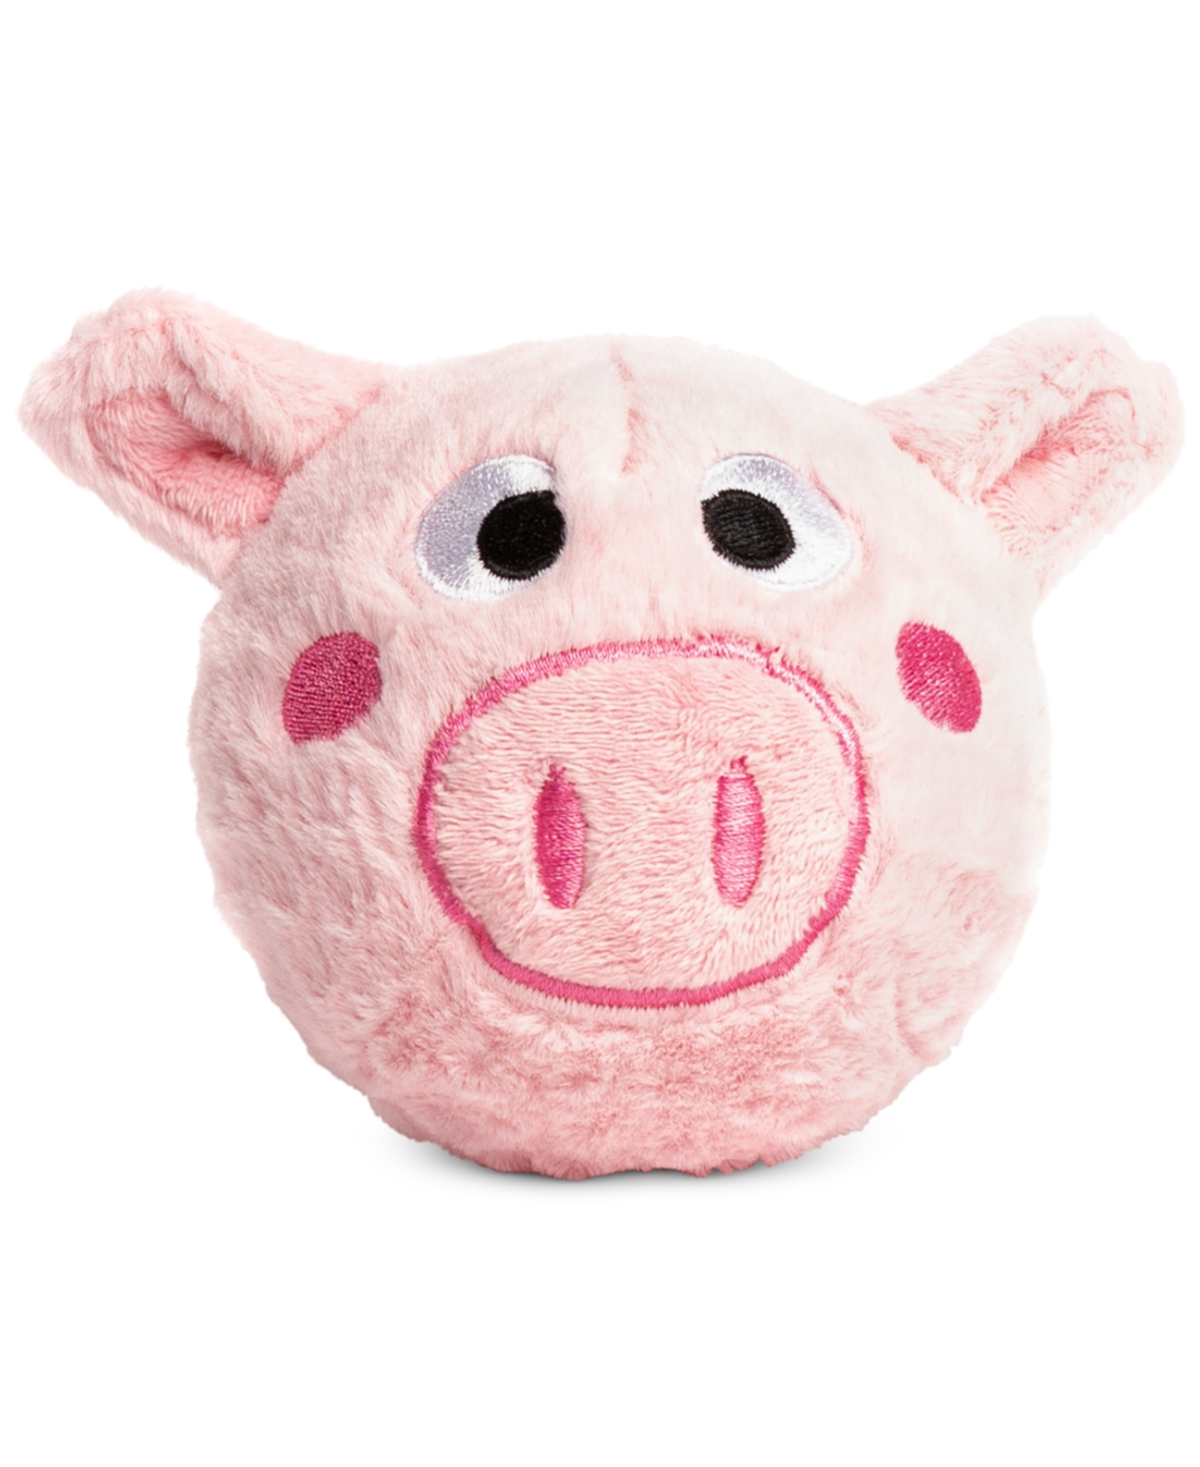 faball Pig Pet Toy, Small - Pink